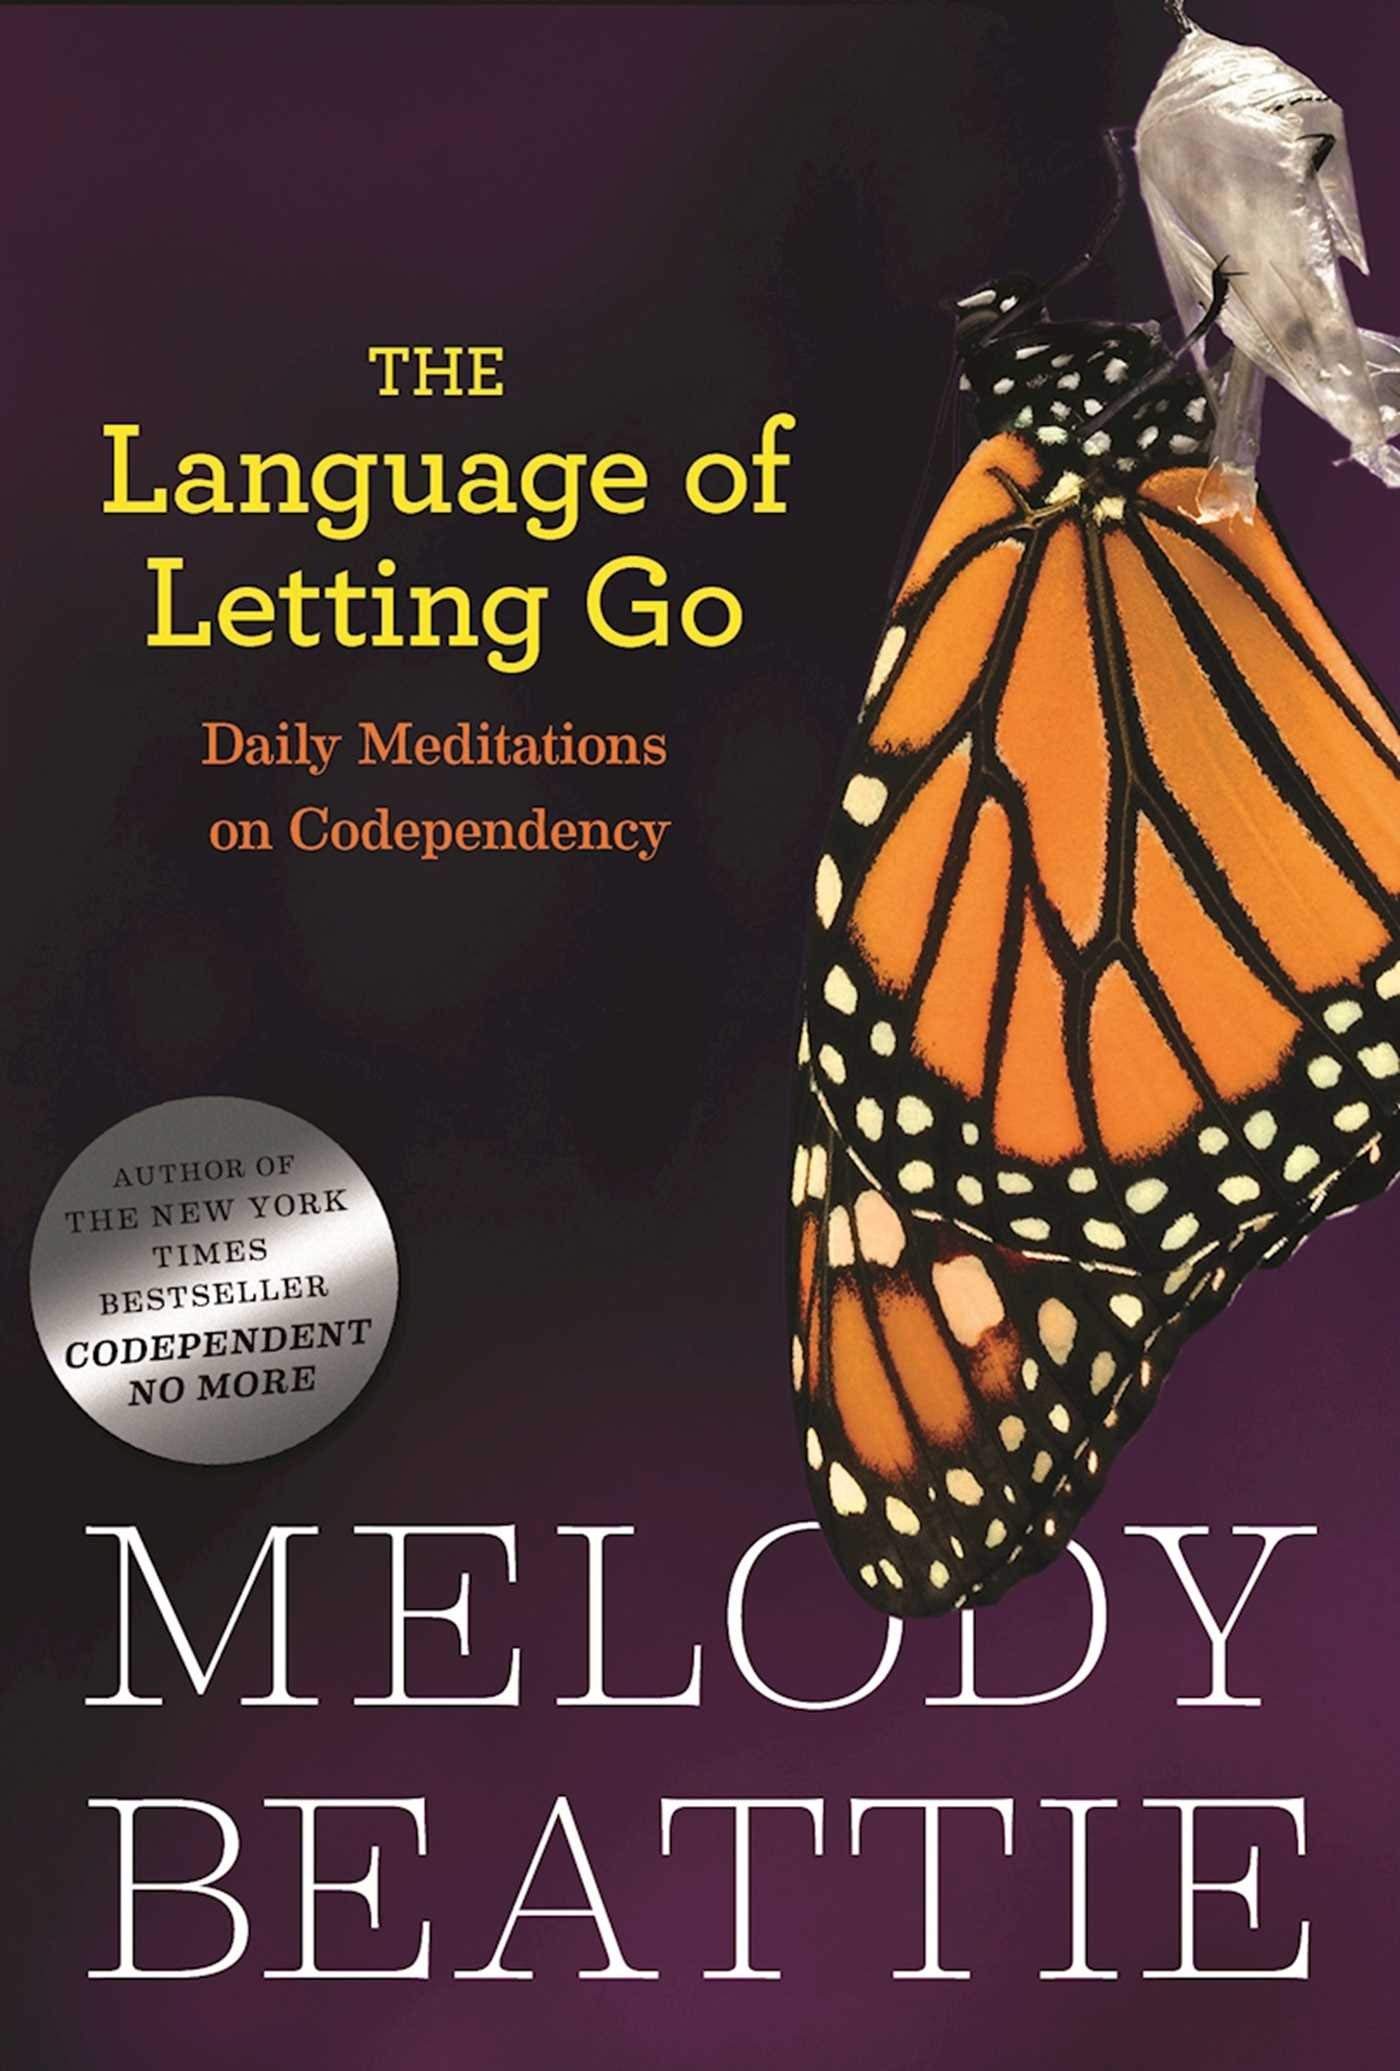 7. 'The Language of Letting Go' by Melody Beattie